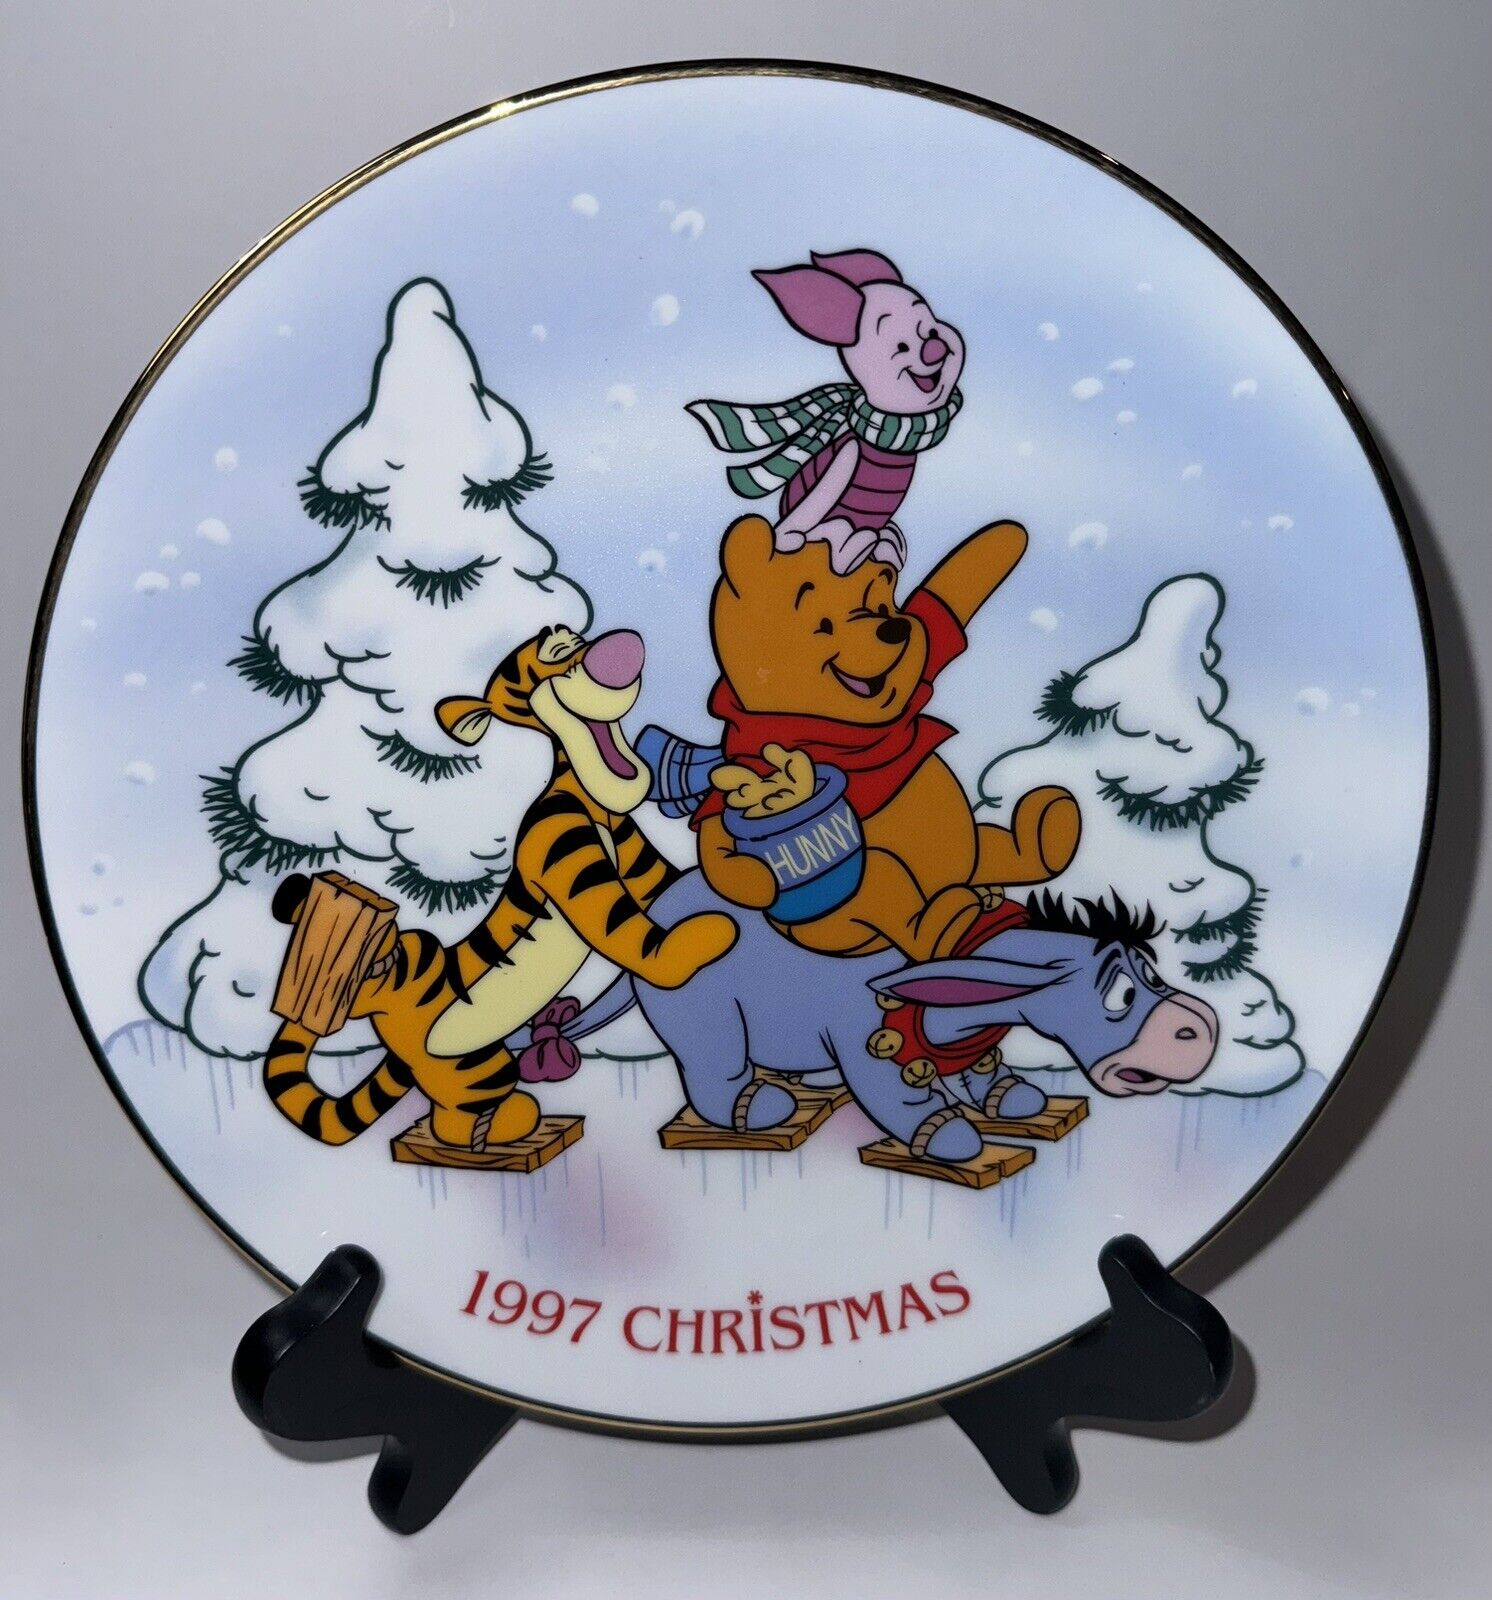 Grolier Disney 1997 Christmas Plate Winnie the Pooh Pooh\'s Skating Party